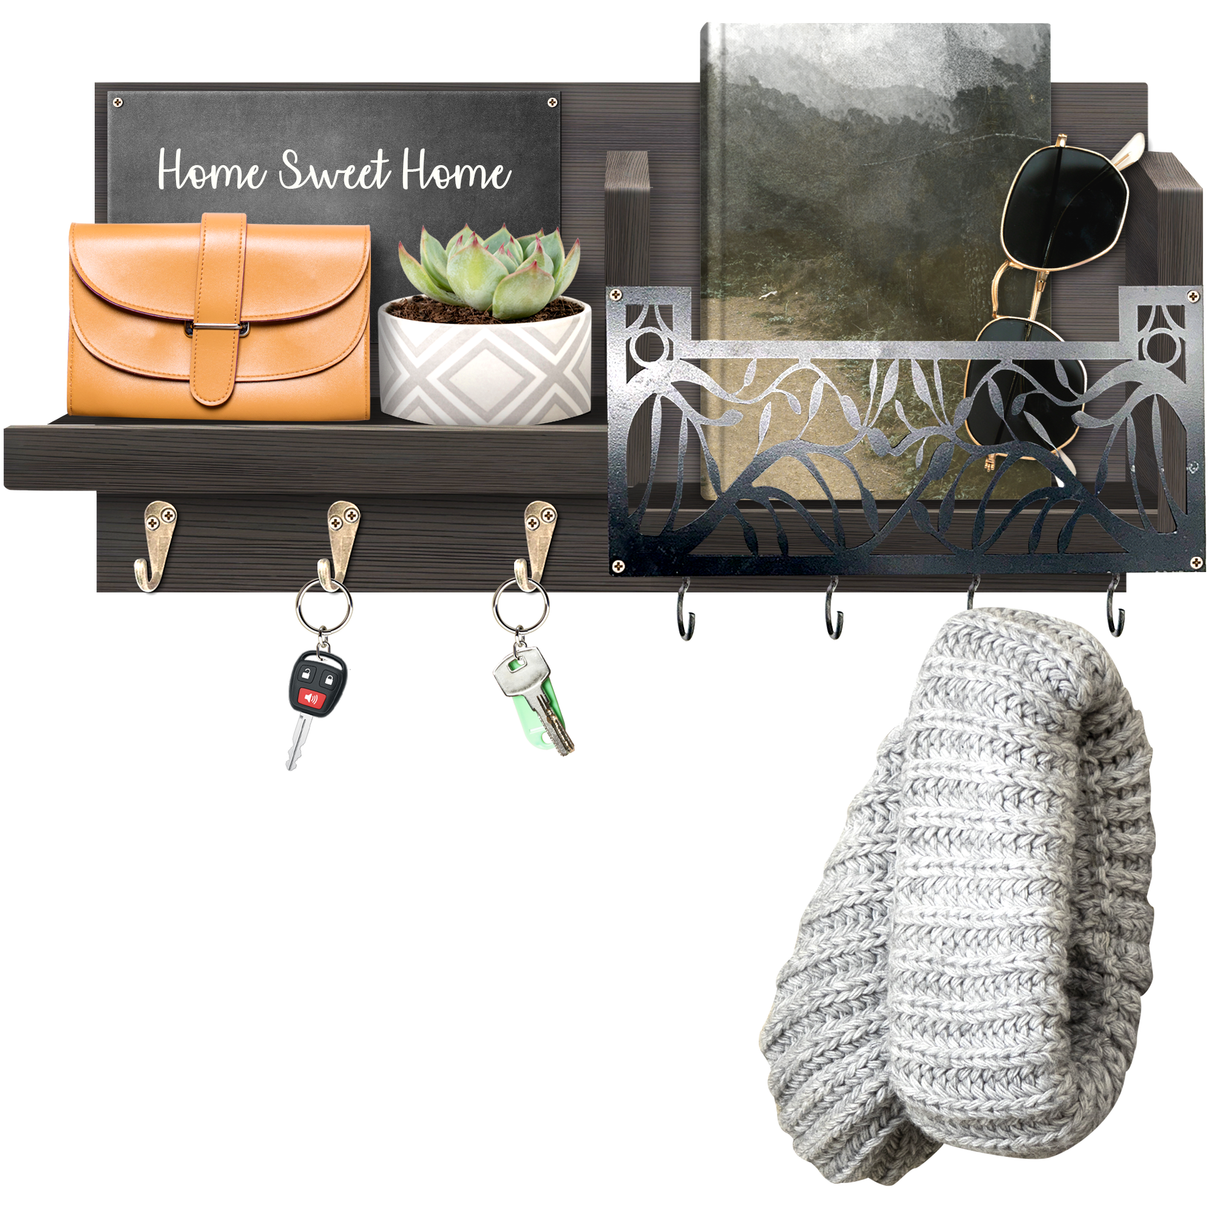 Key Holder Wall Mount And Mail Organizer